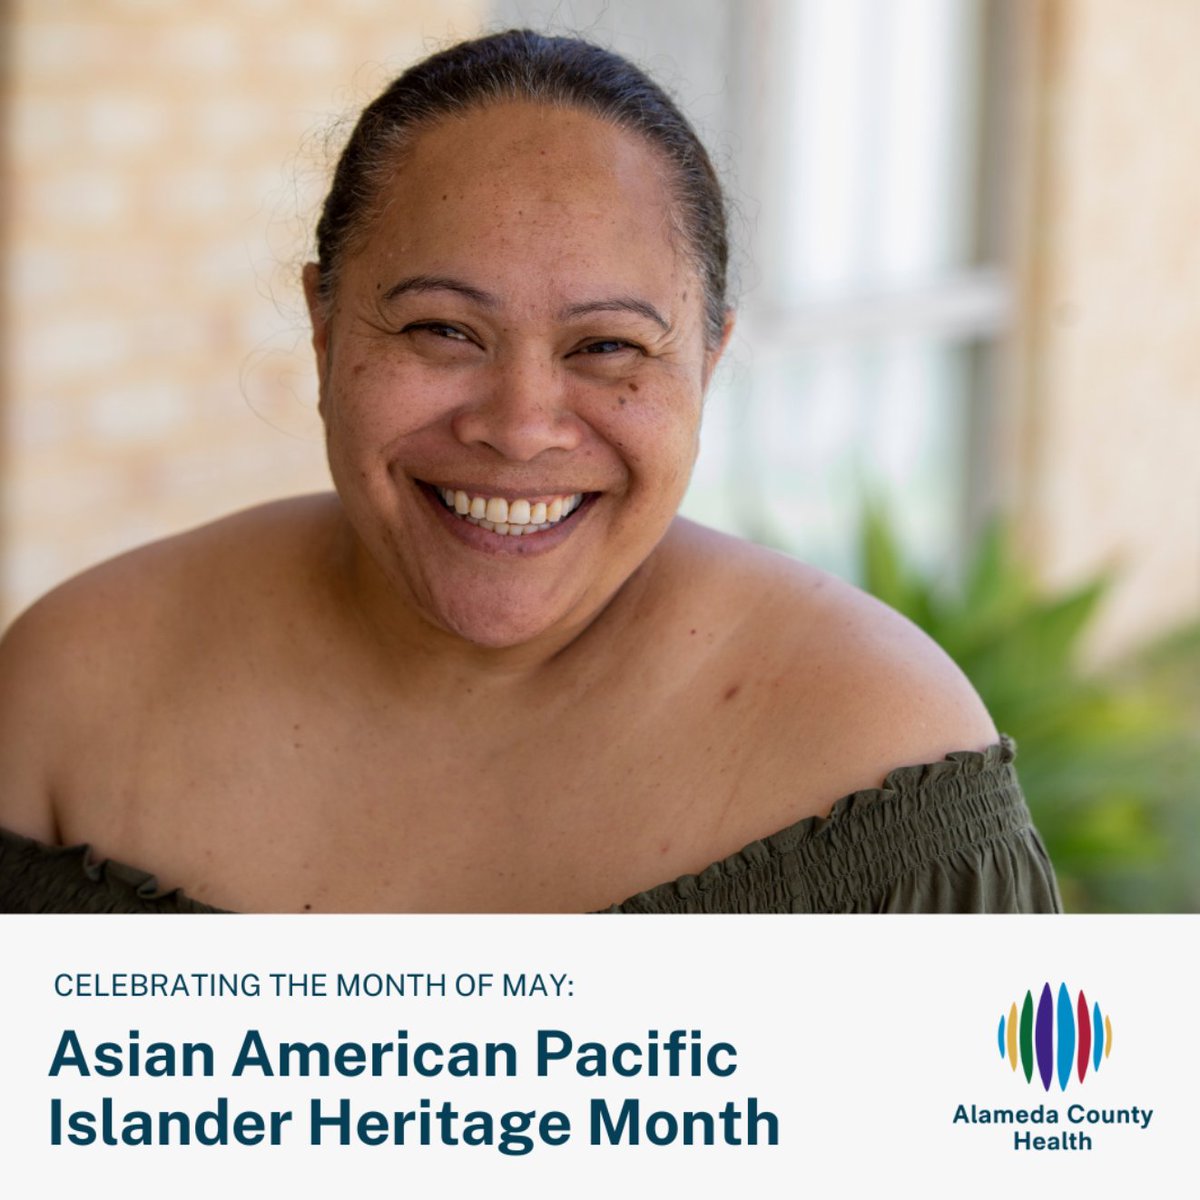 May is Asian American Pacific Islander Heritage Month. We honor the history and contributions of Asian Americans, Native Hawaiians, and Pacific Islanders to our communities asianpacificheritage.gov